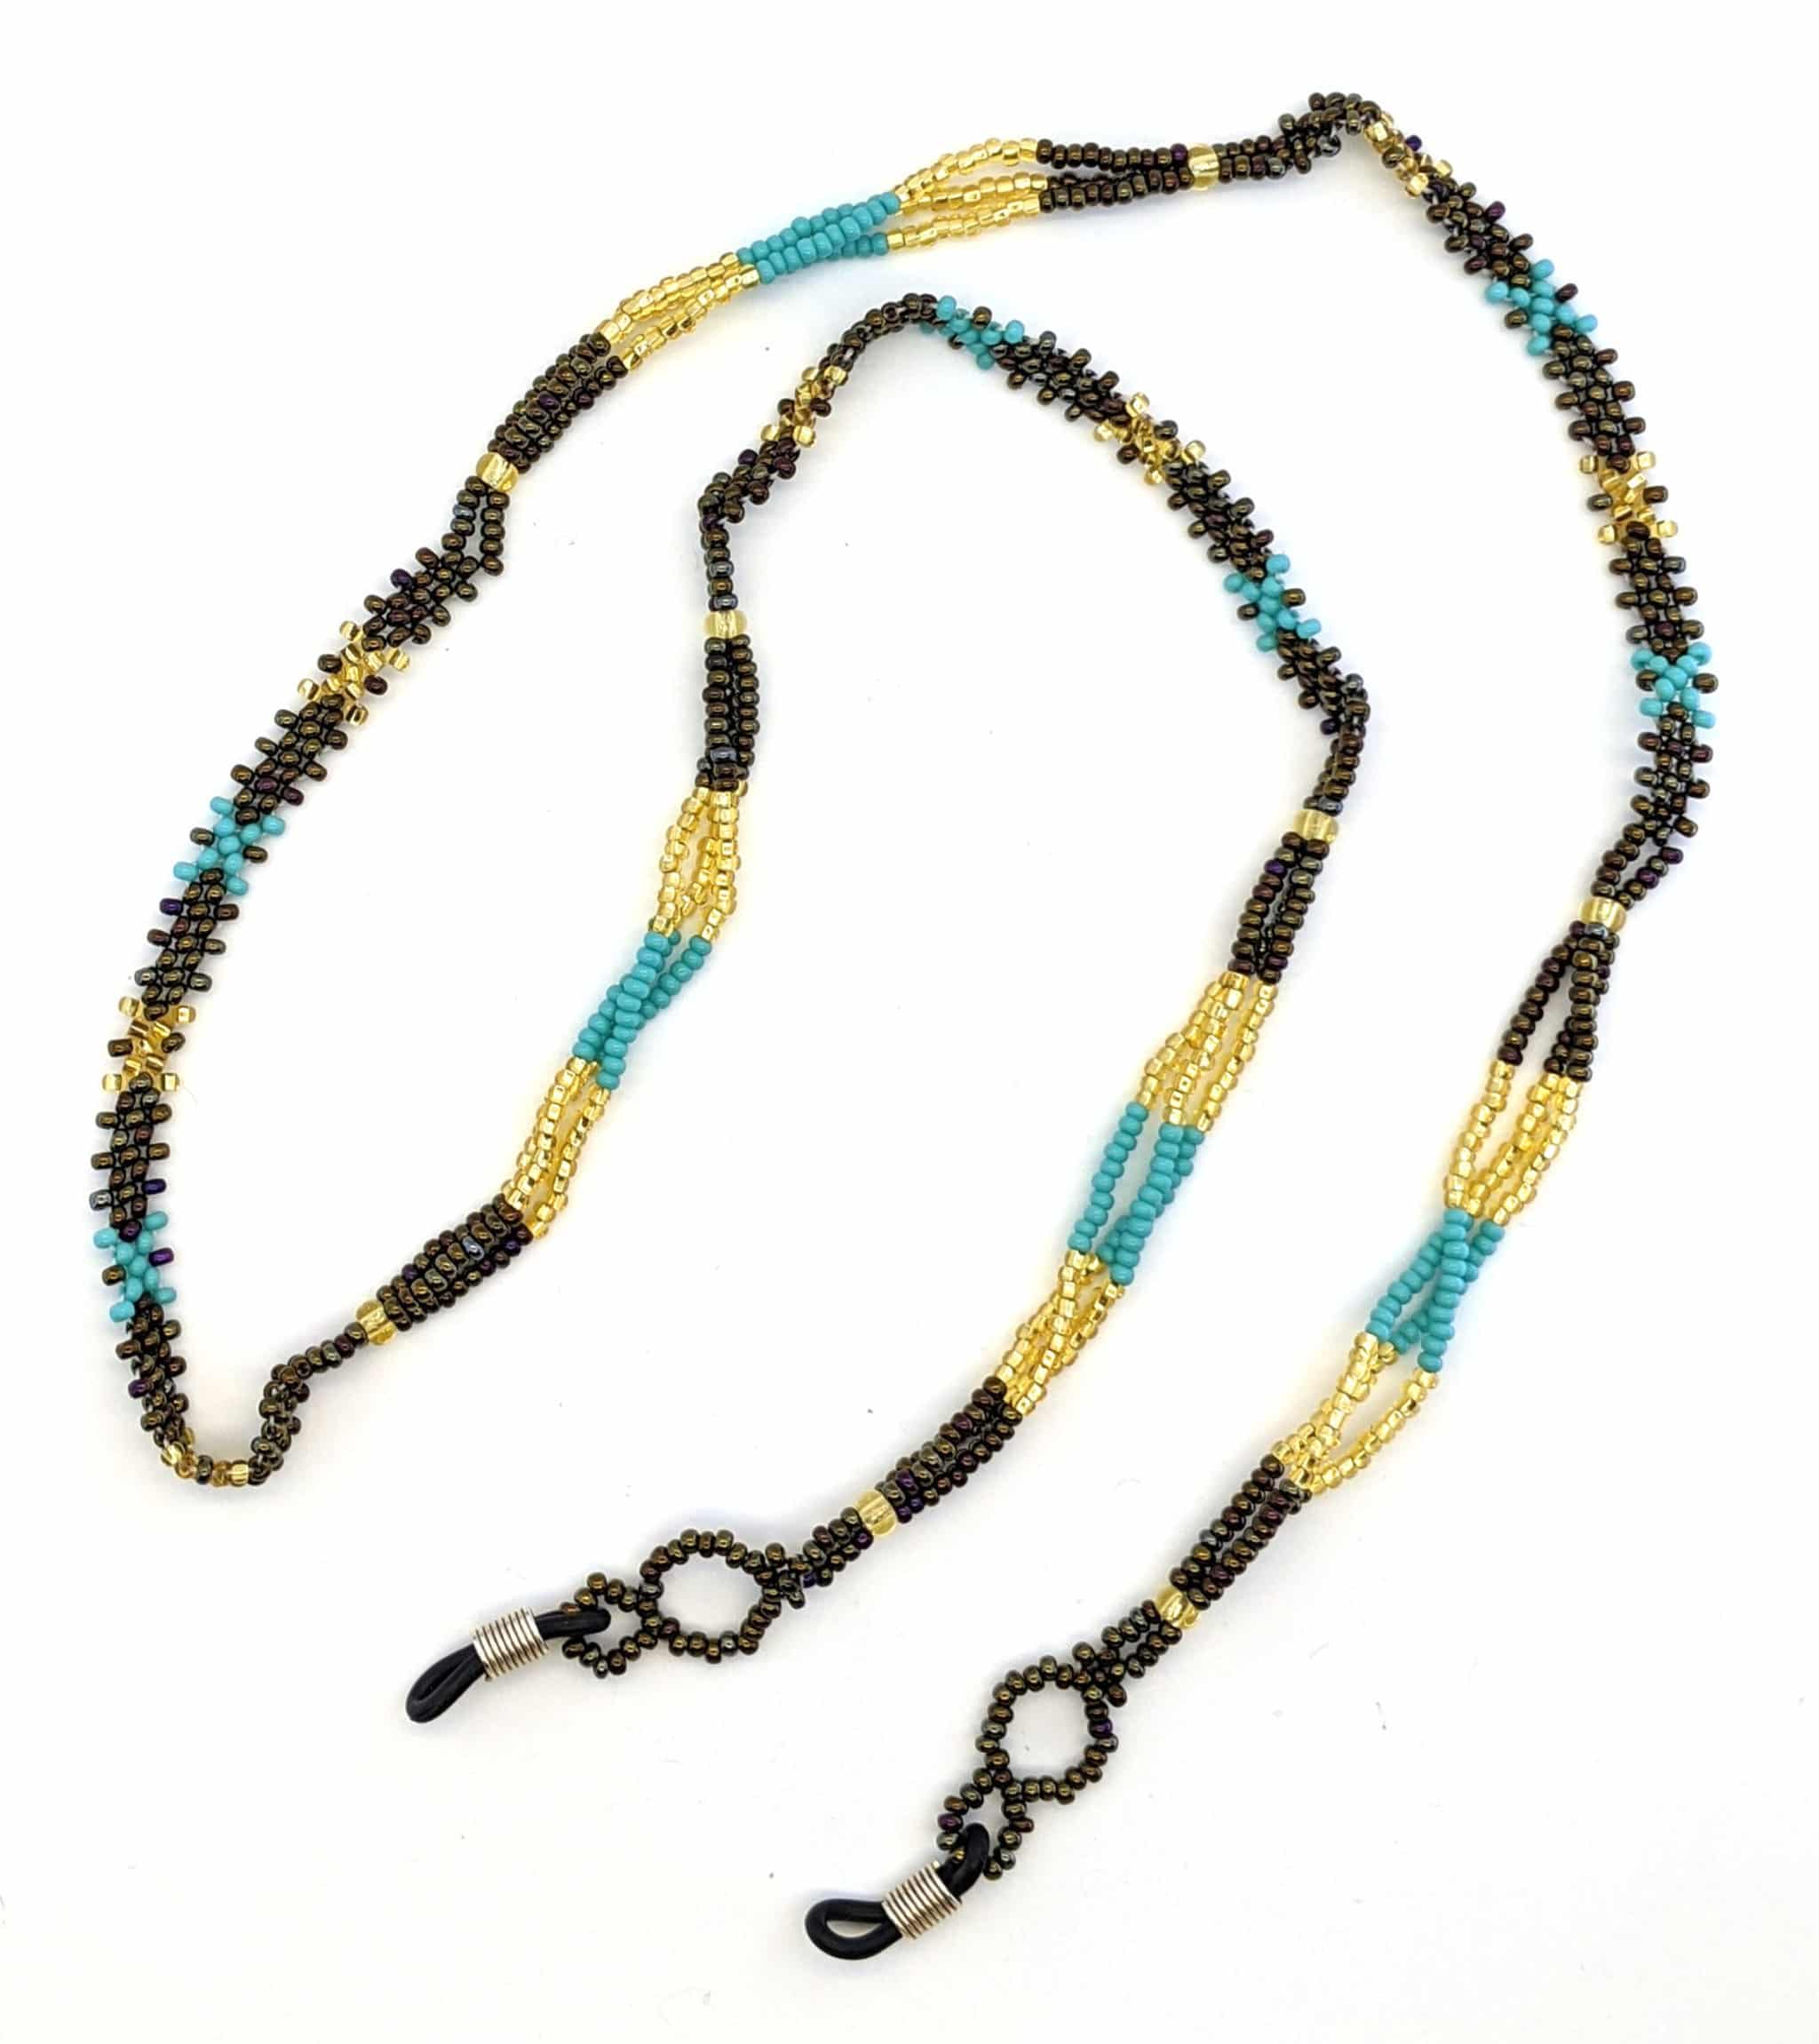 Turquoise, Bronze and Gold Beaded Glasses Holder